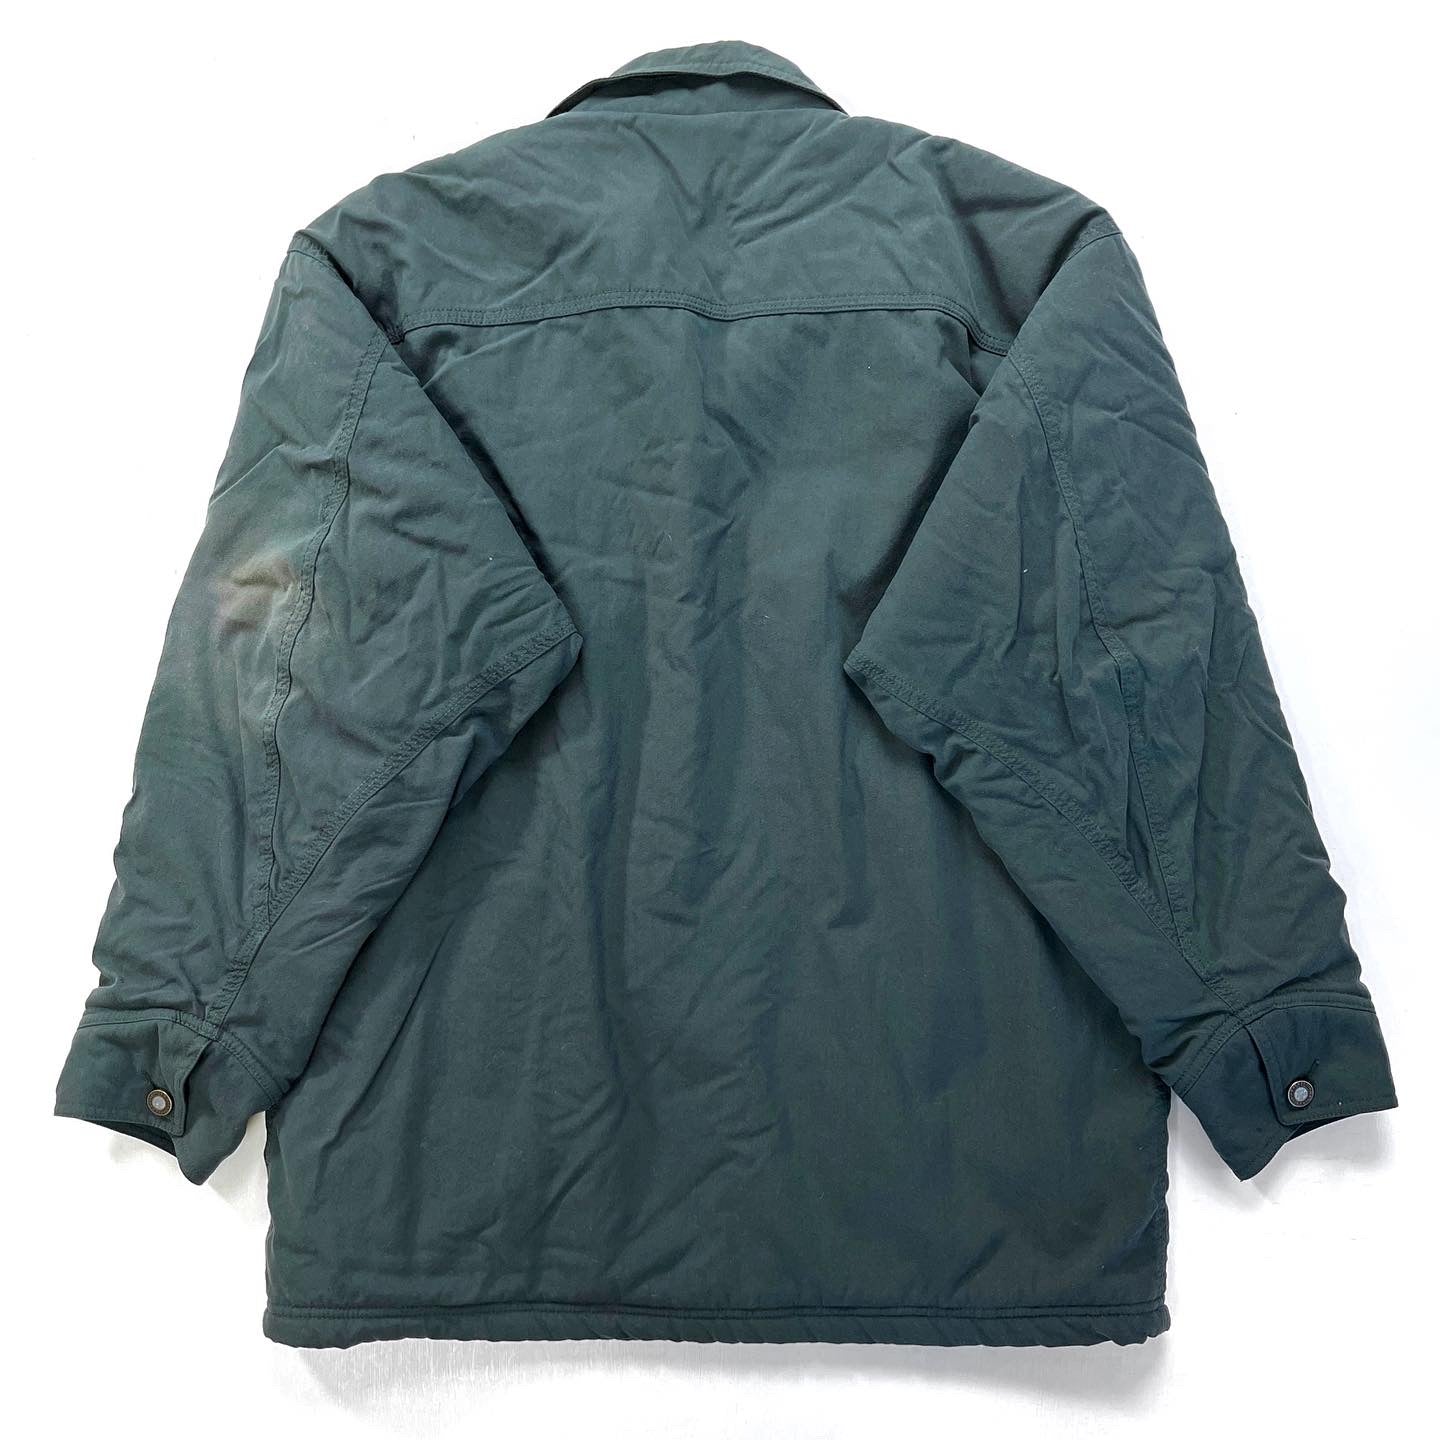 1995 Patagonia Pile-Lined Canvas Nuevo Range Coat, Spruce (S/M)